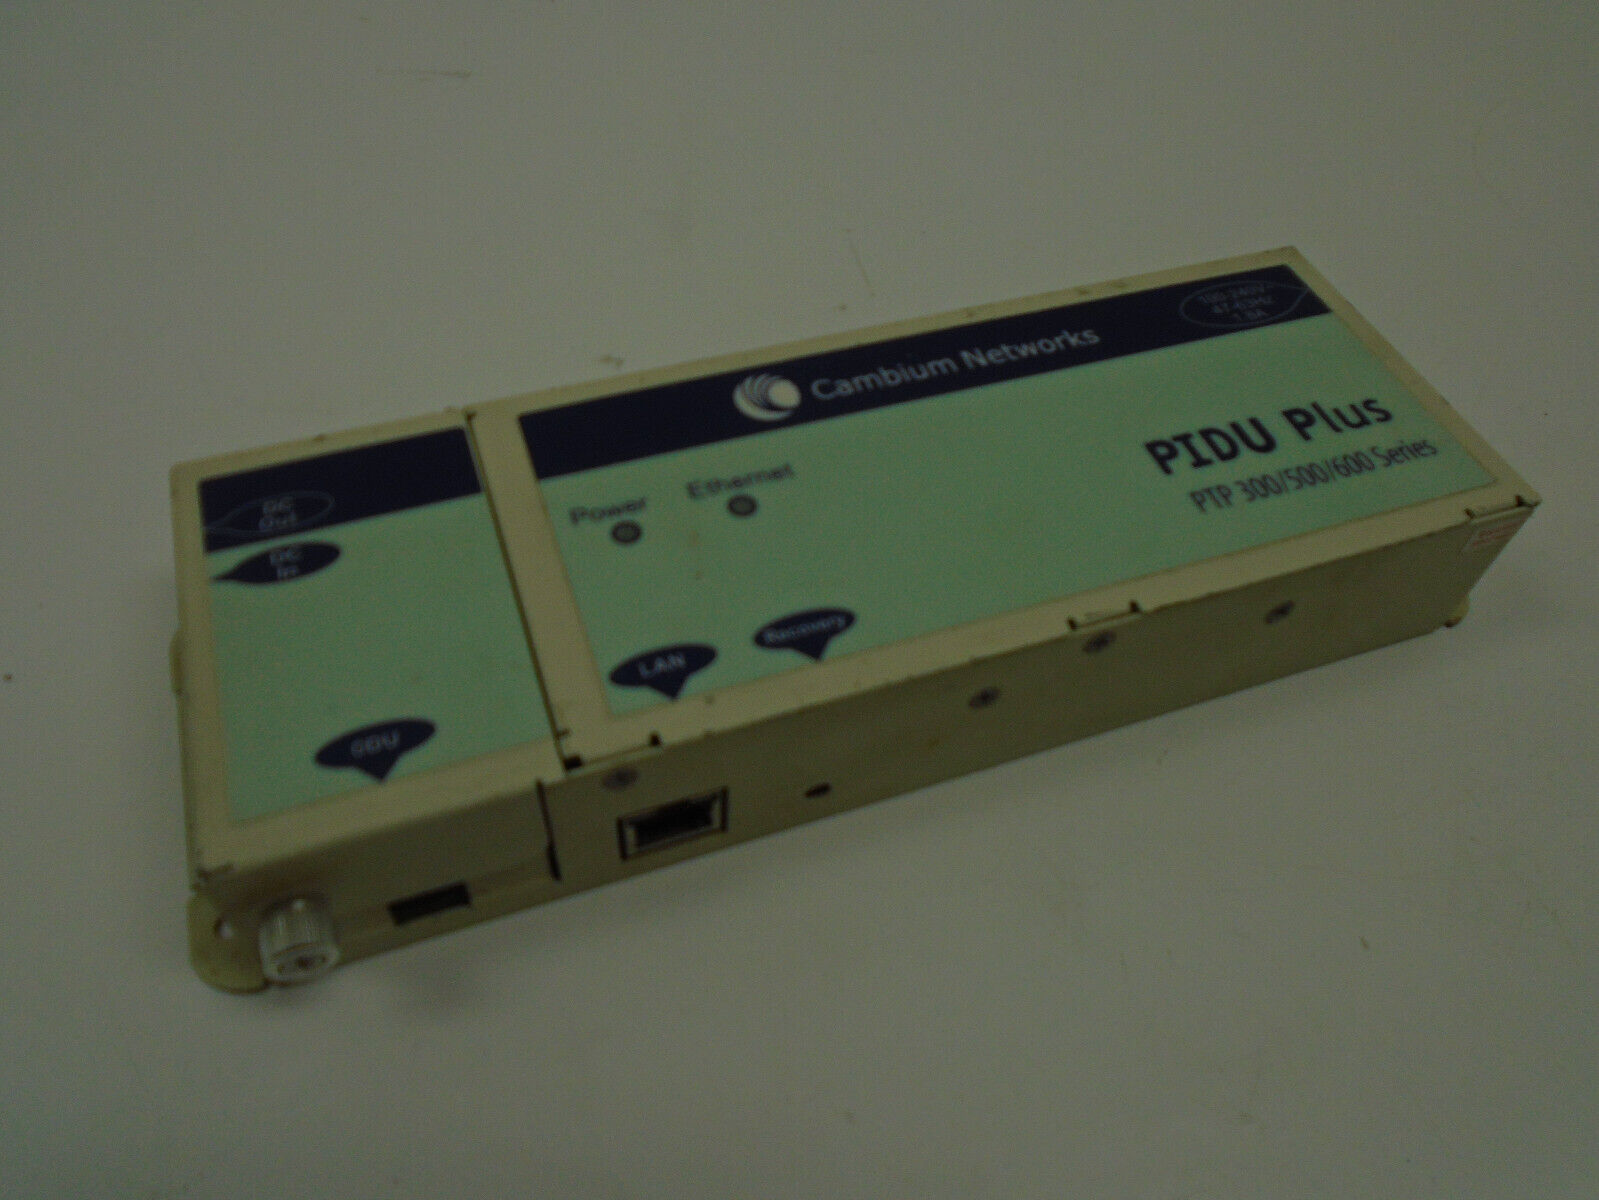 Cambium Networks E083105ACC G PIDU Plus PTP 300/500/600 Series POE Injector